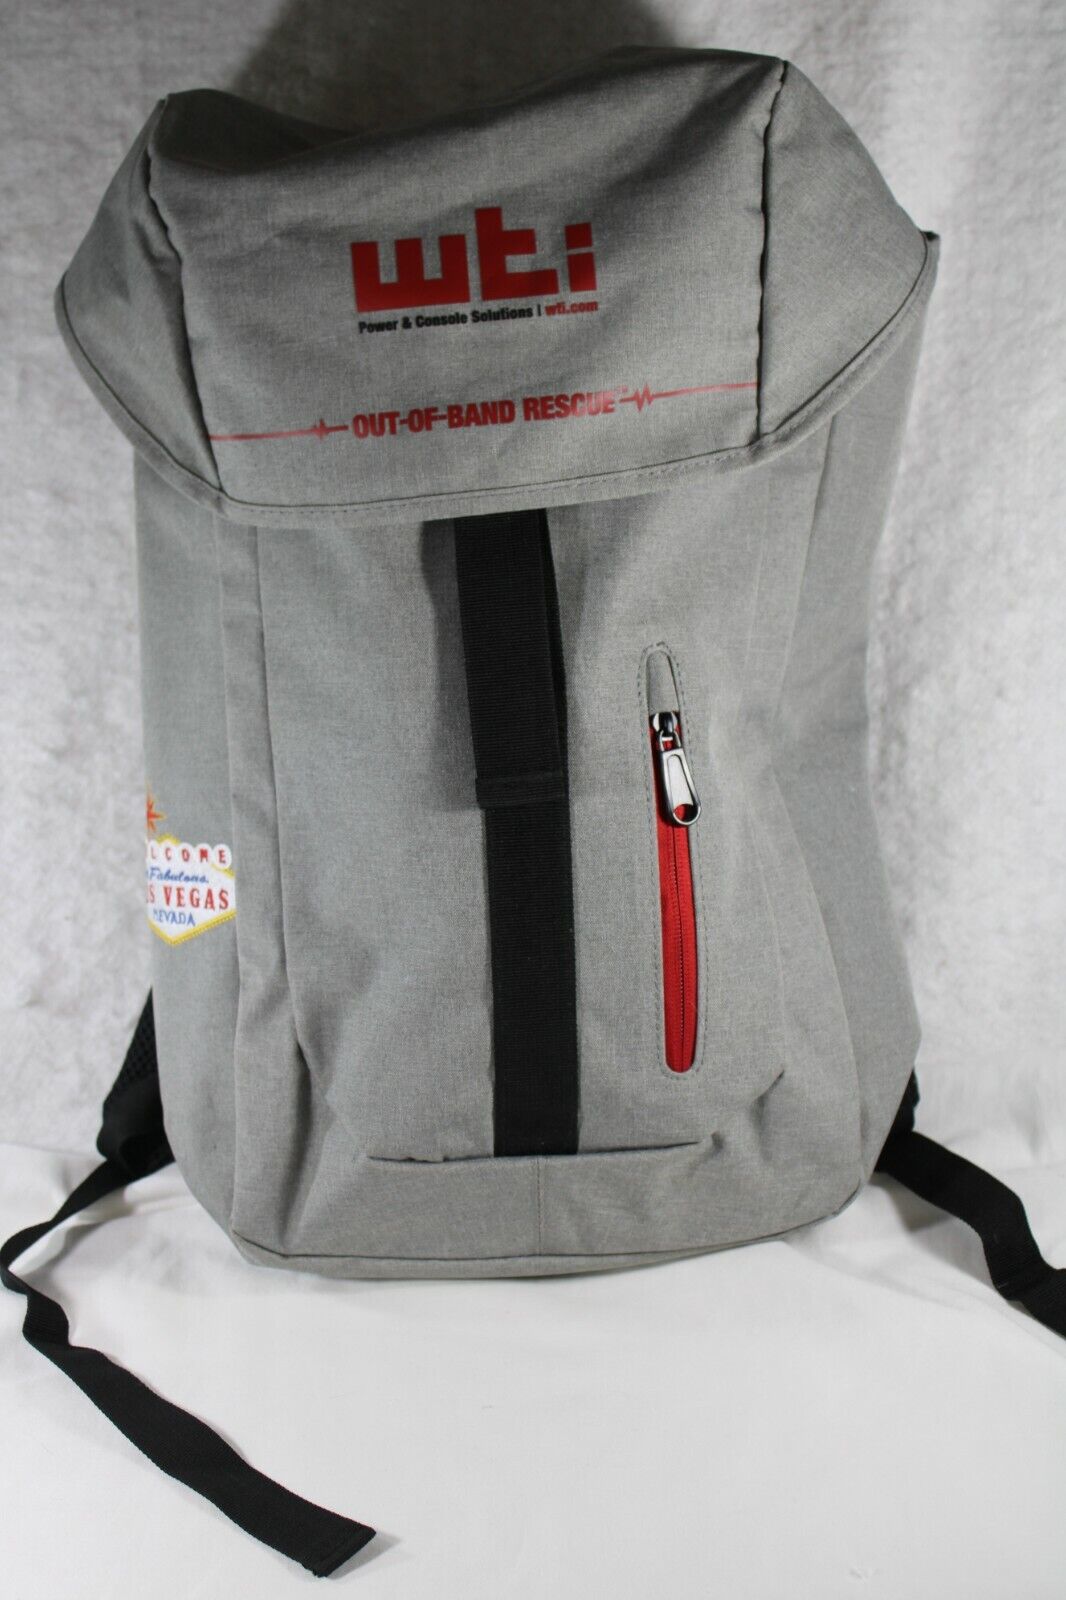 Backpack Computer Bag - Welcome to Las Vegas - WTI Padded Straps